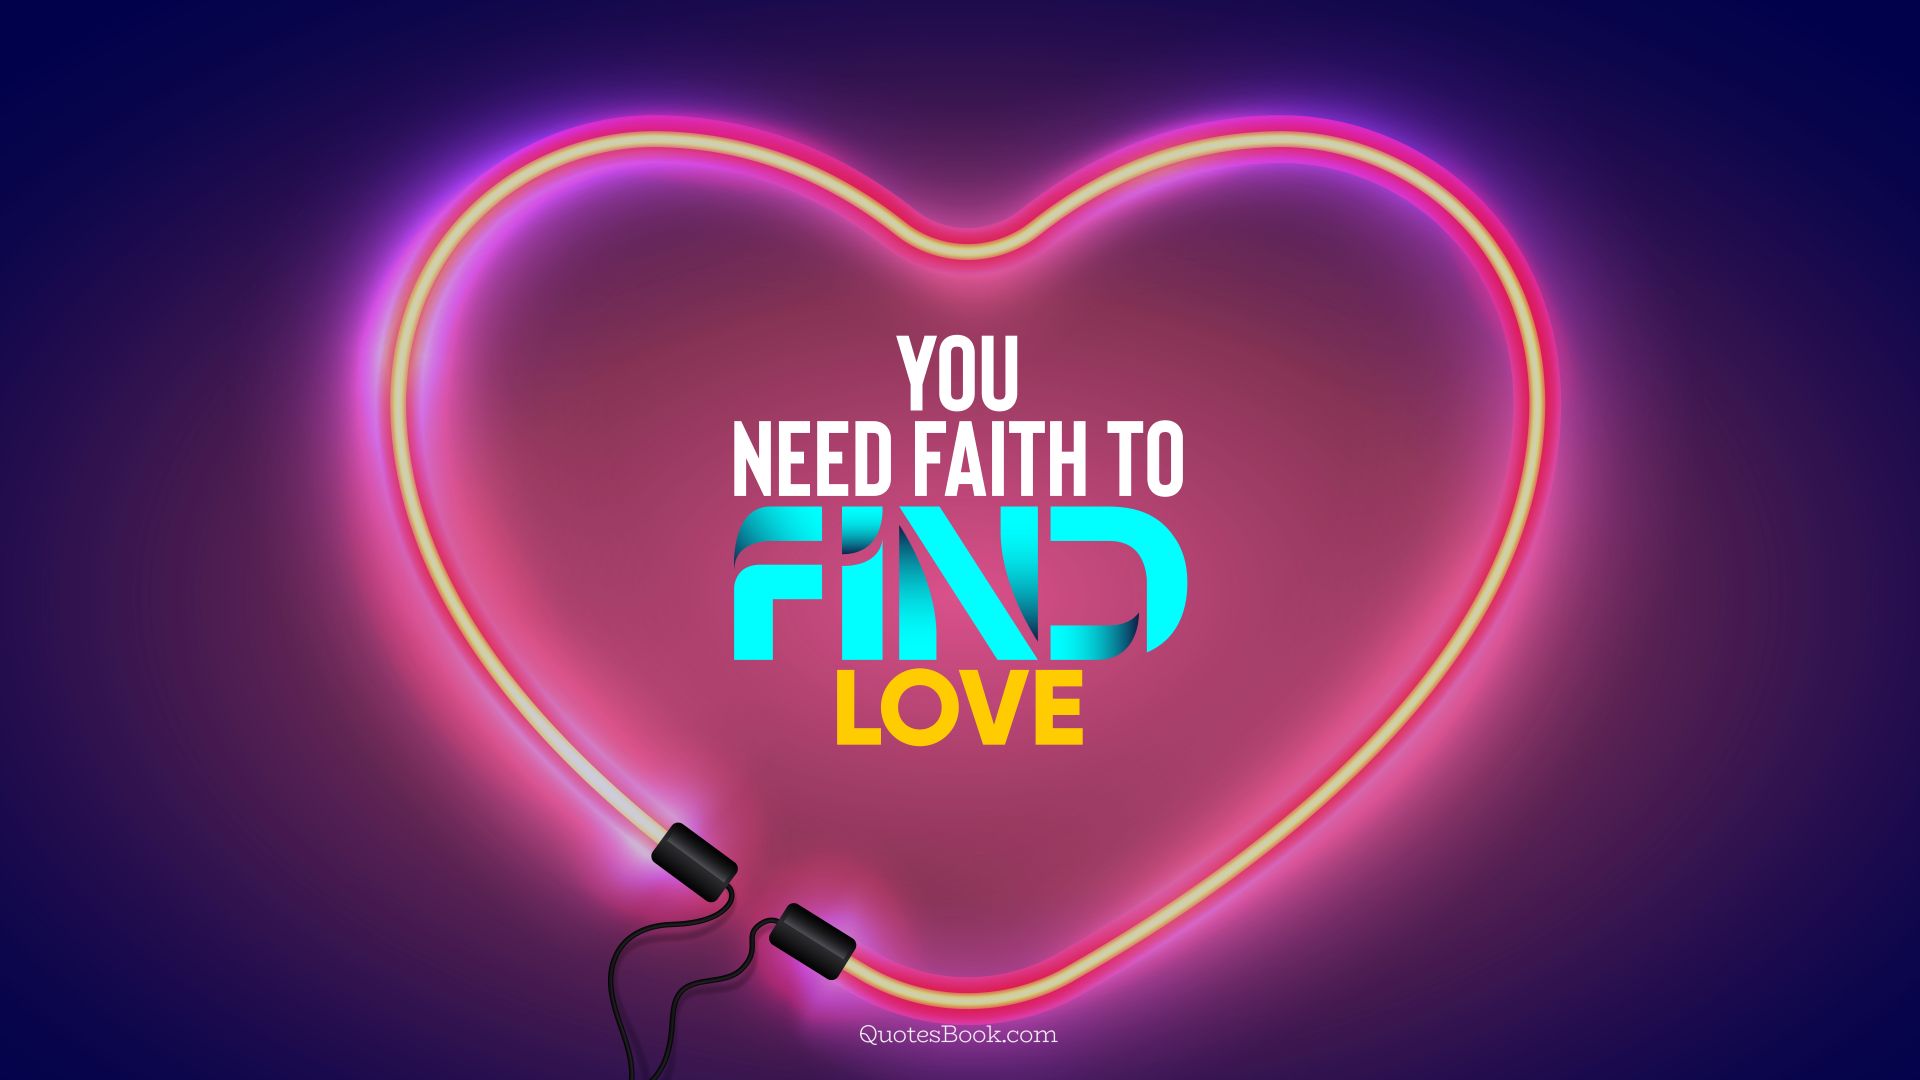 You need faith to find love. - Quote by QuotesBook